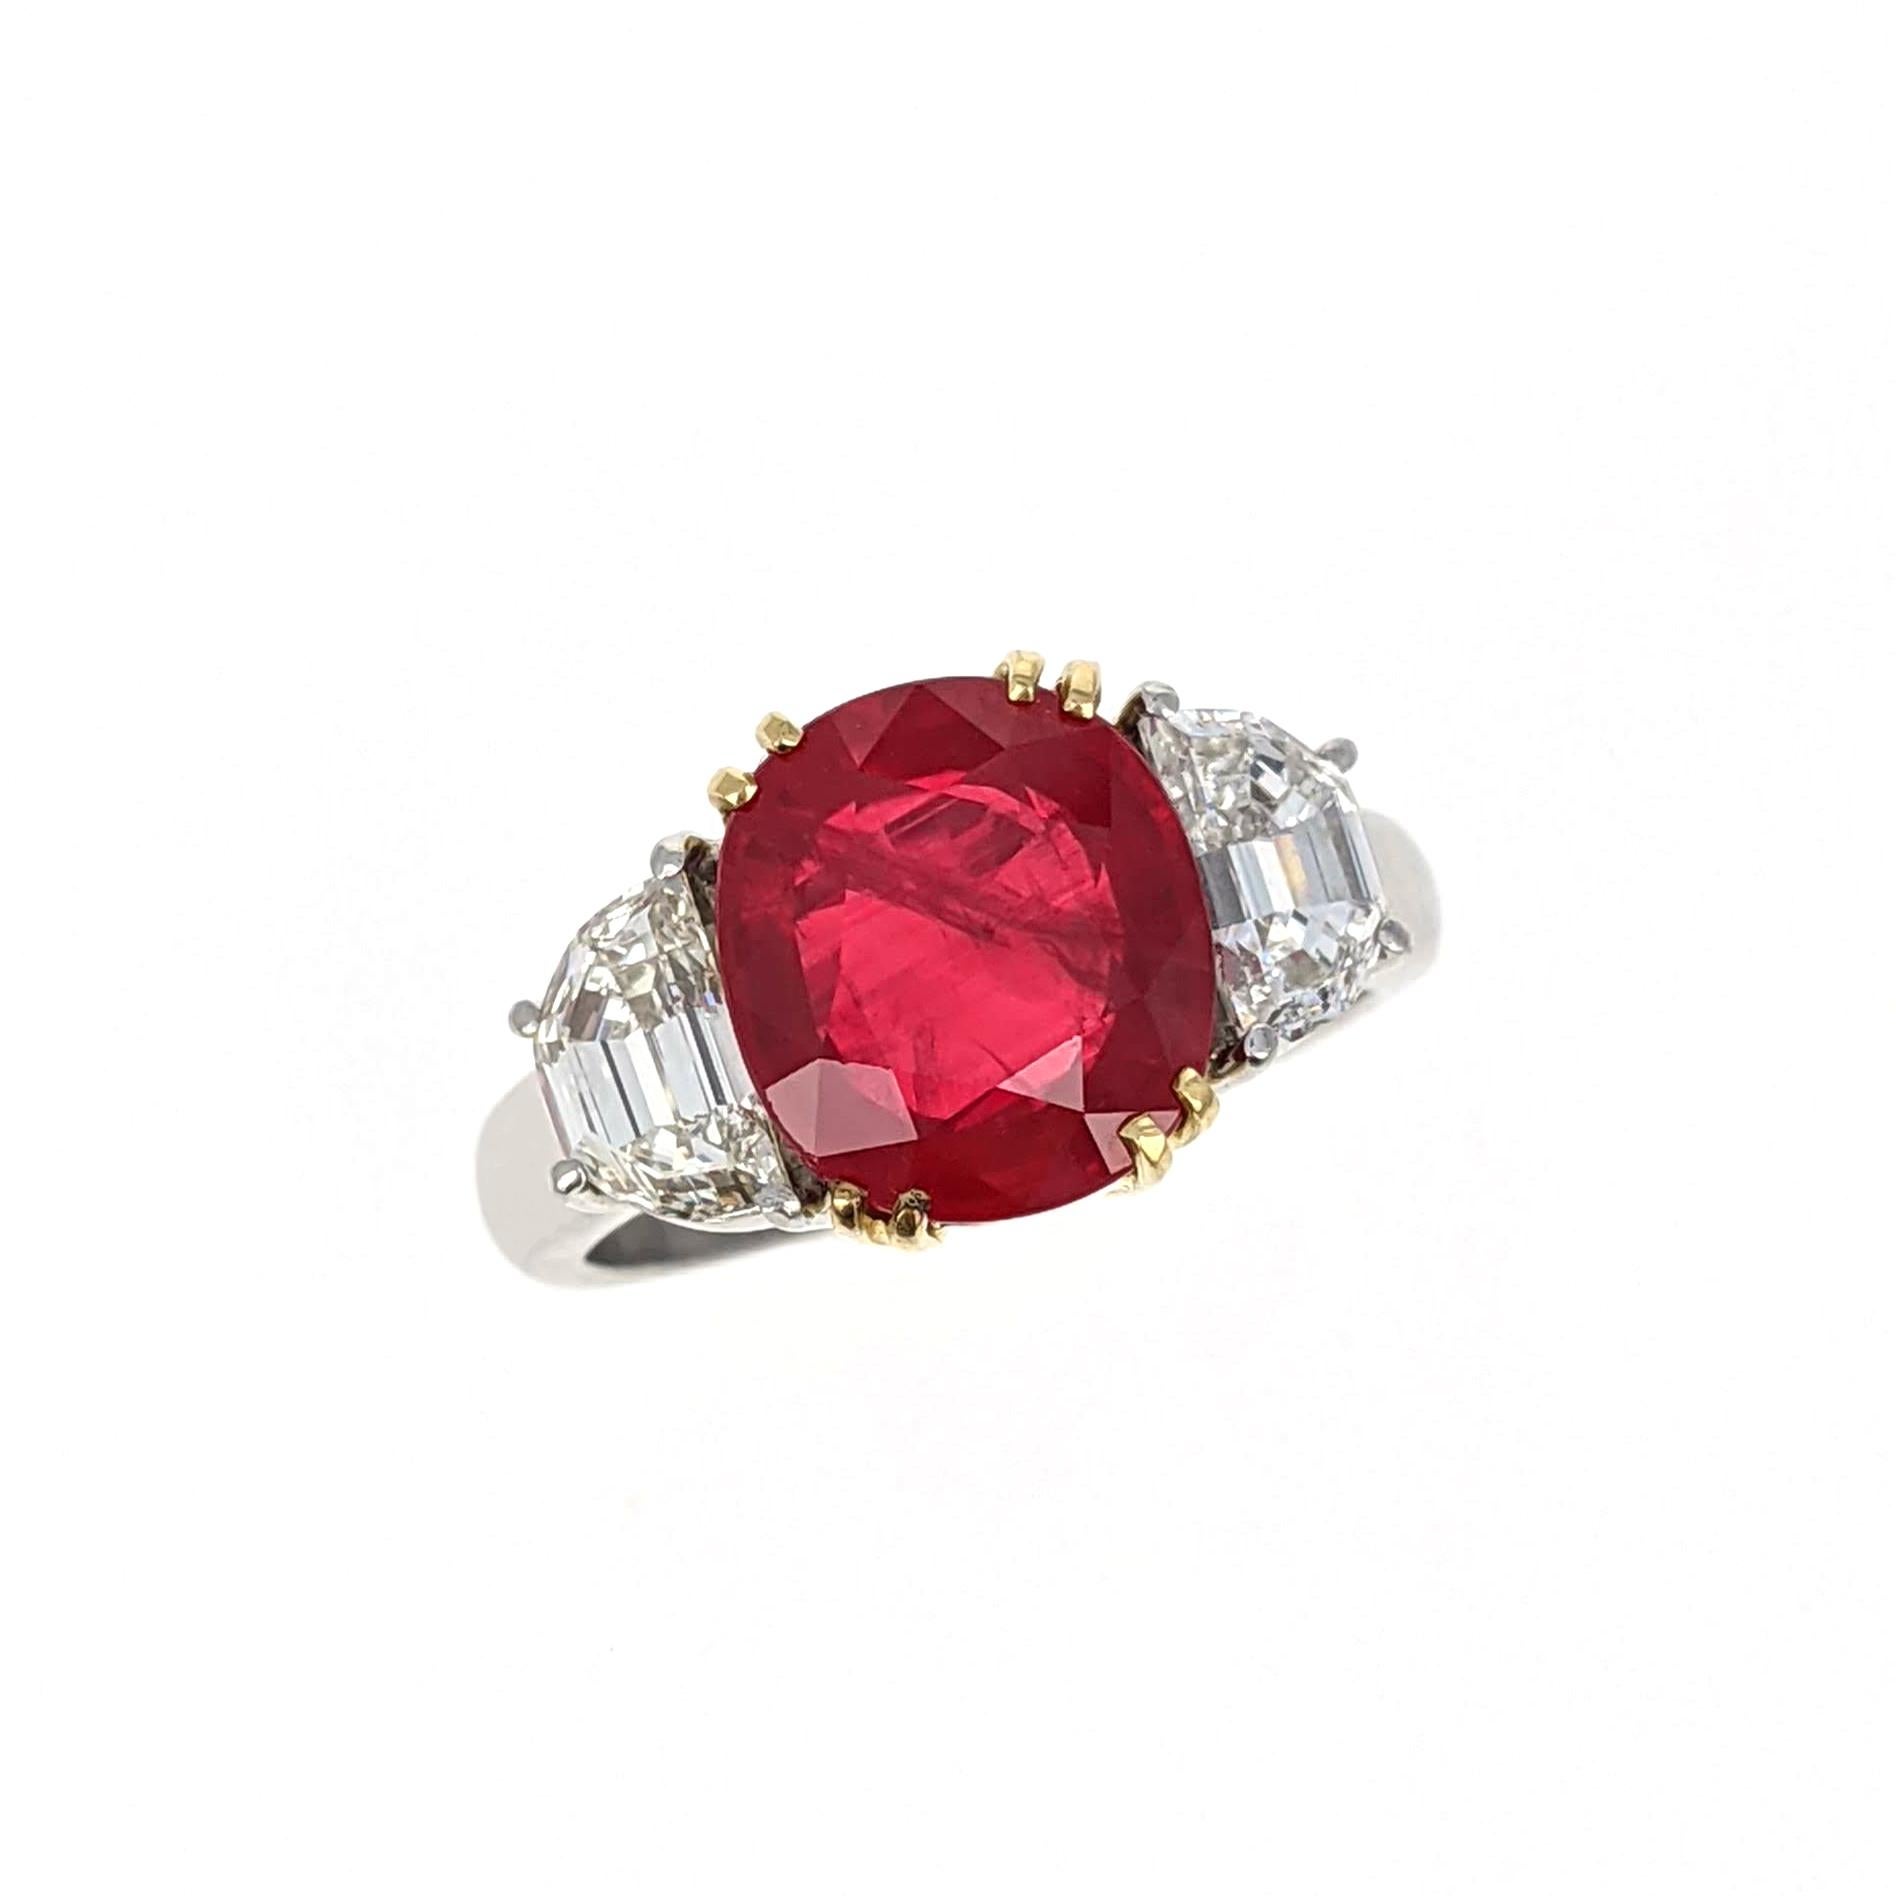 This beautiful ring centers upon an oval-shaped ruby weighing 4.07 carats and is flanked by two half moon-shaped diamonds. It is mounted in platinum and yellow gold. Size 5.5.

Accompanied by a report from the AGL laboratory stating that the ruby is